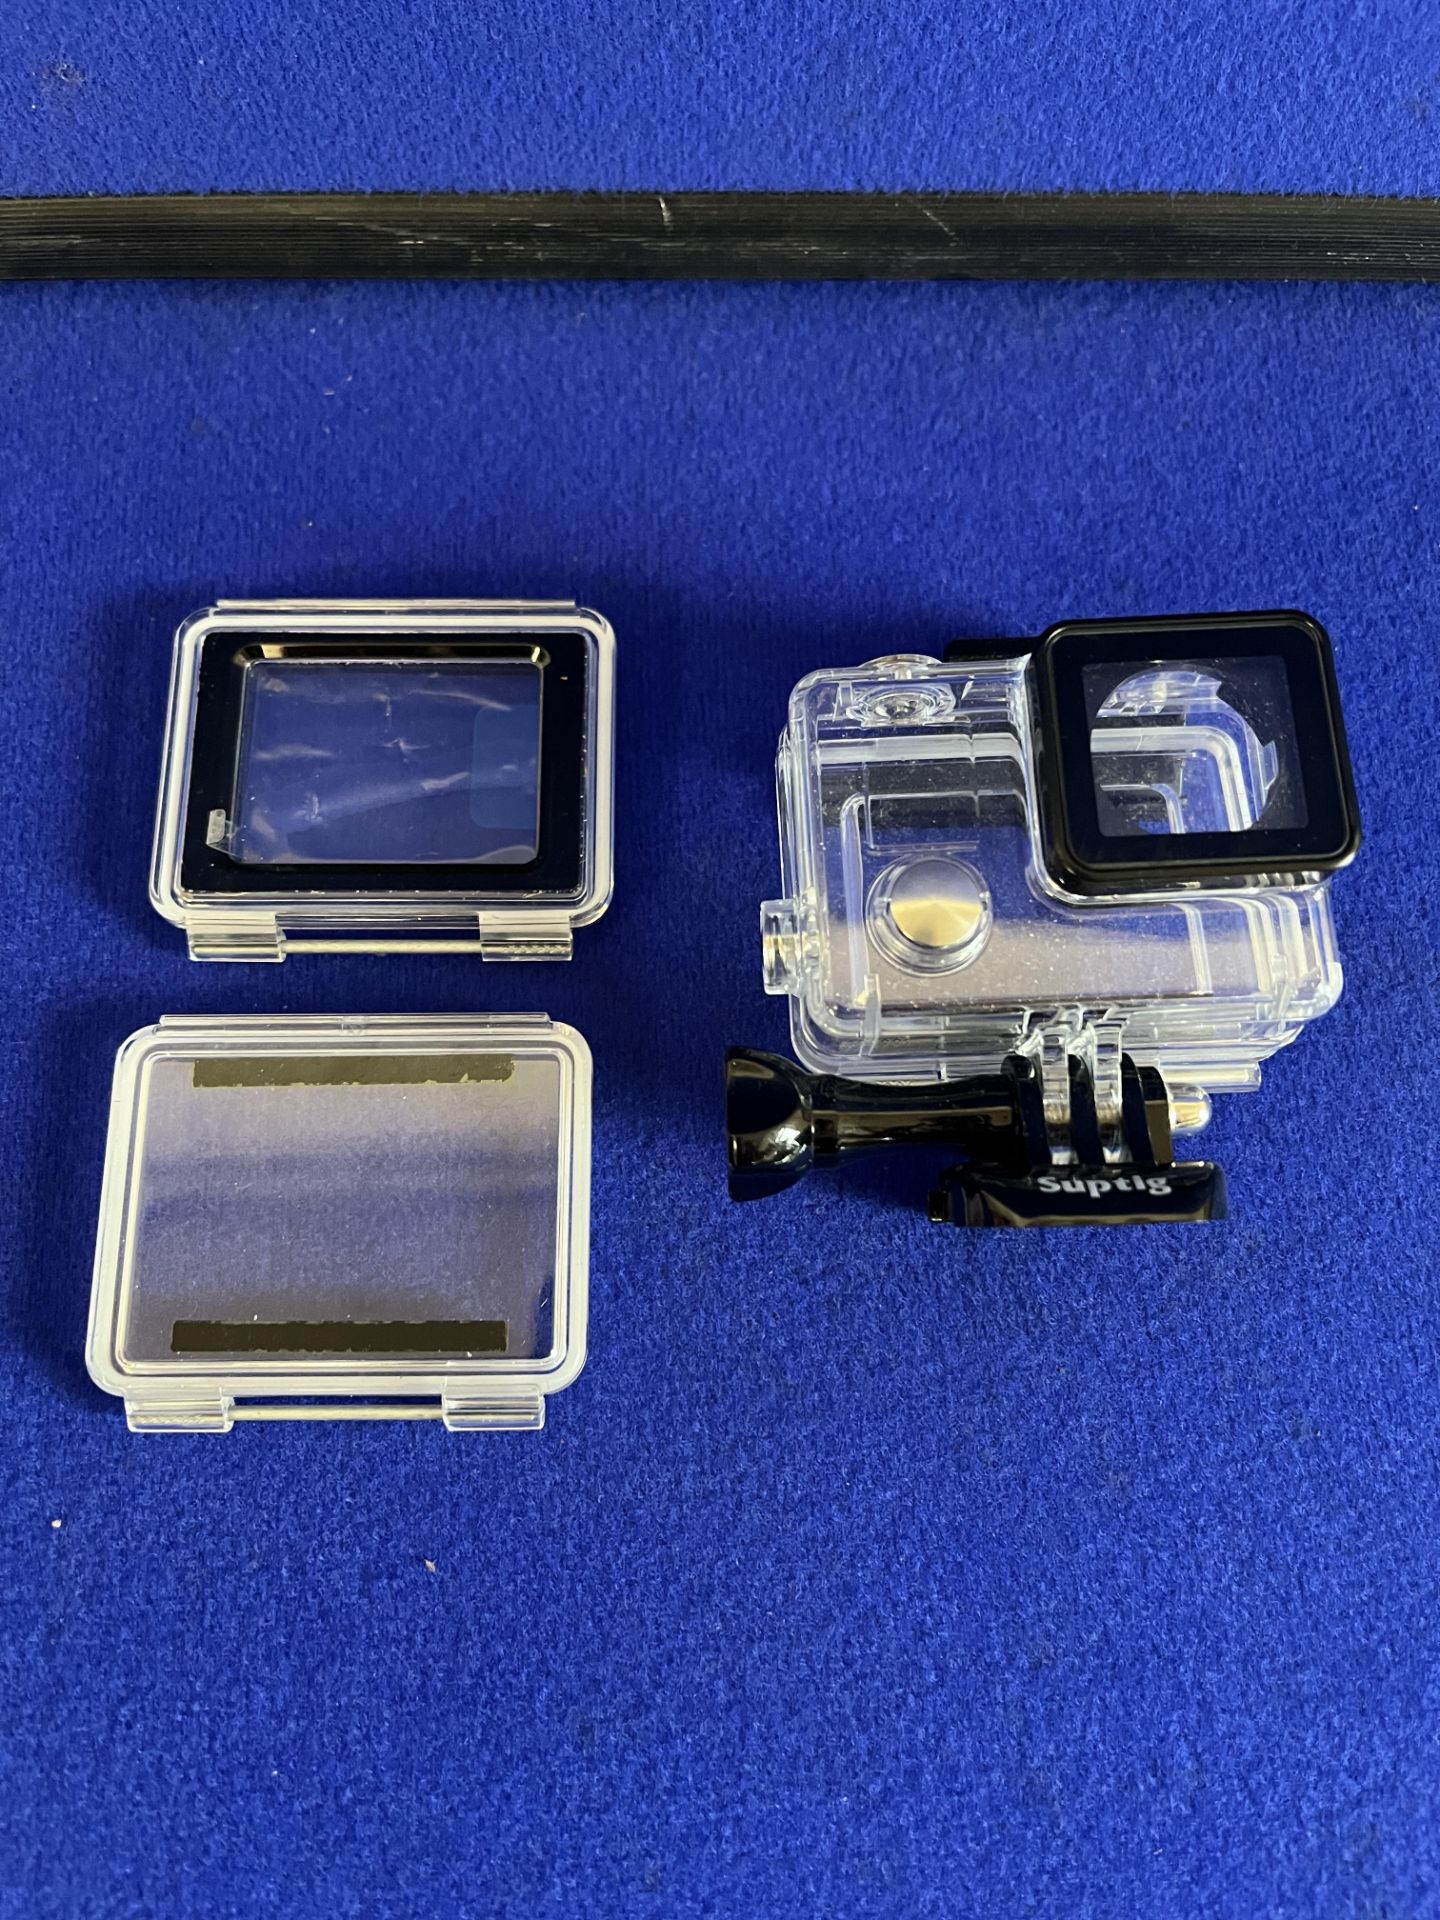 GoPro Hero 4 Camera with accessories - as pictured - Image 6 of 8